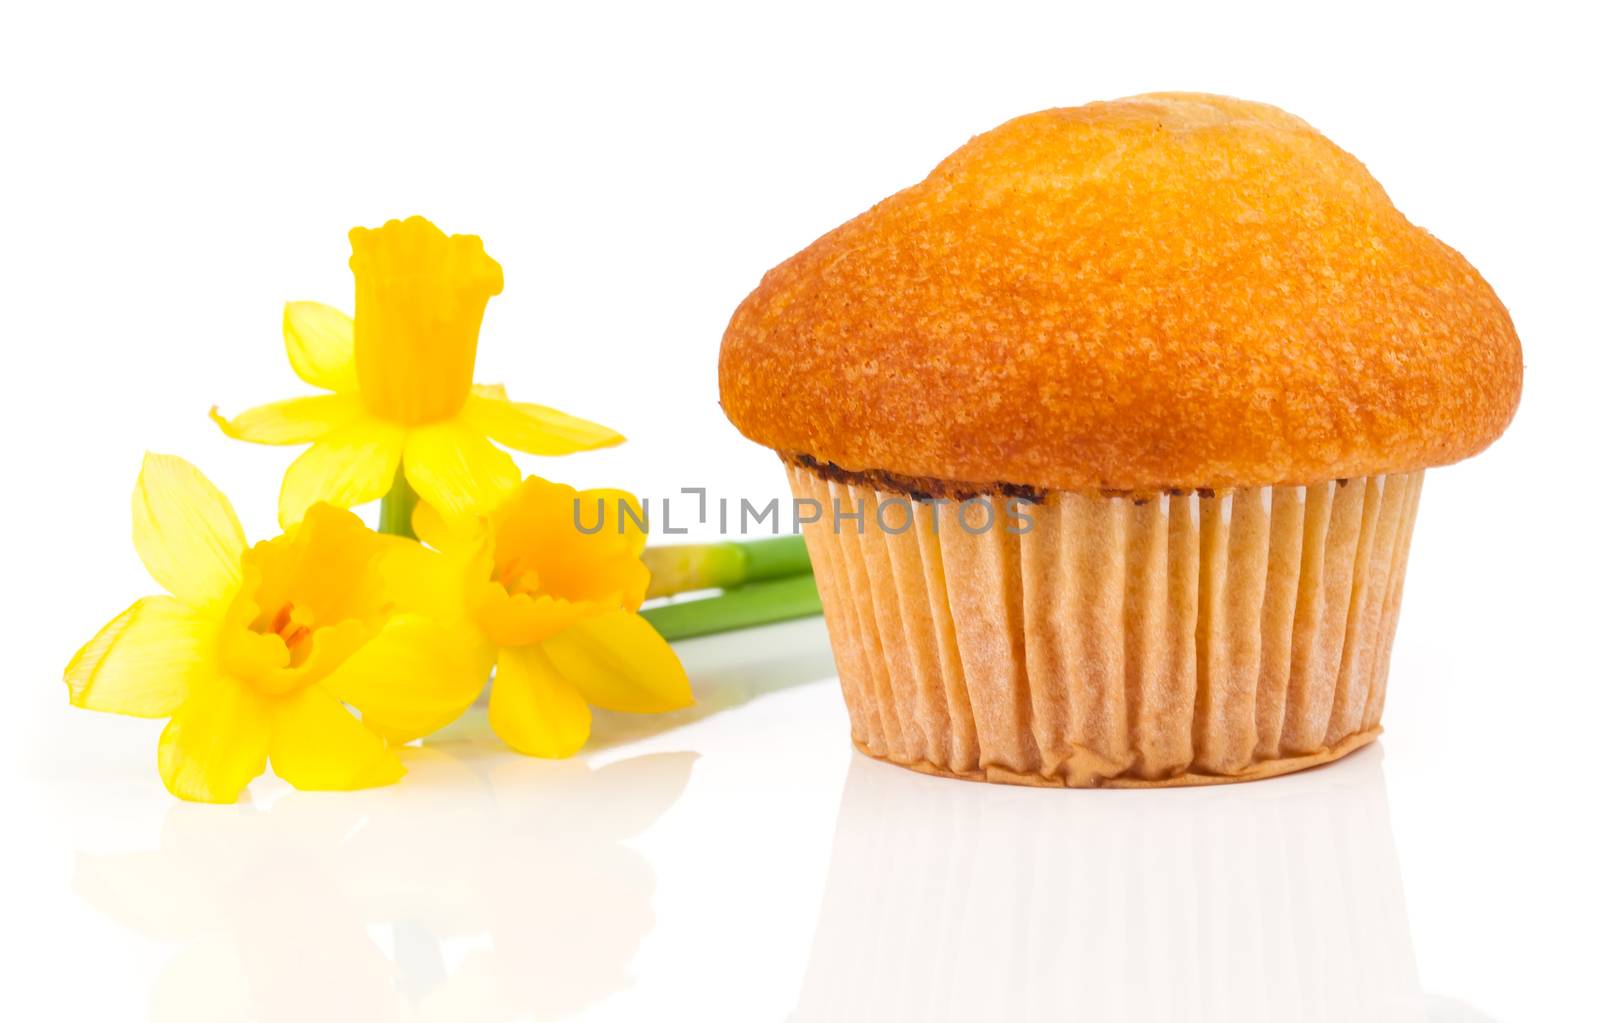 muffins, isolated on white background by motorolka